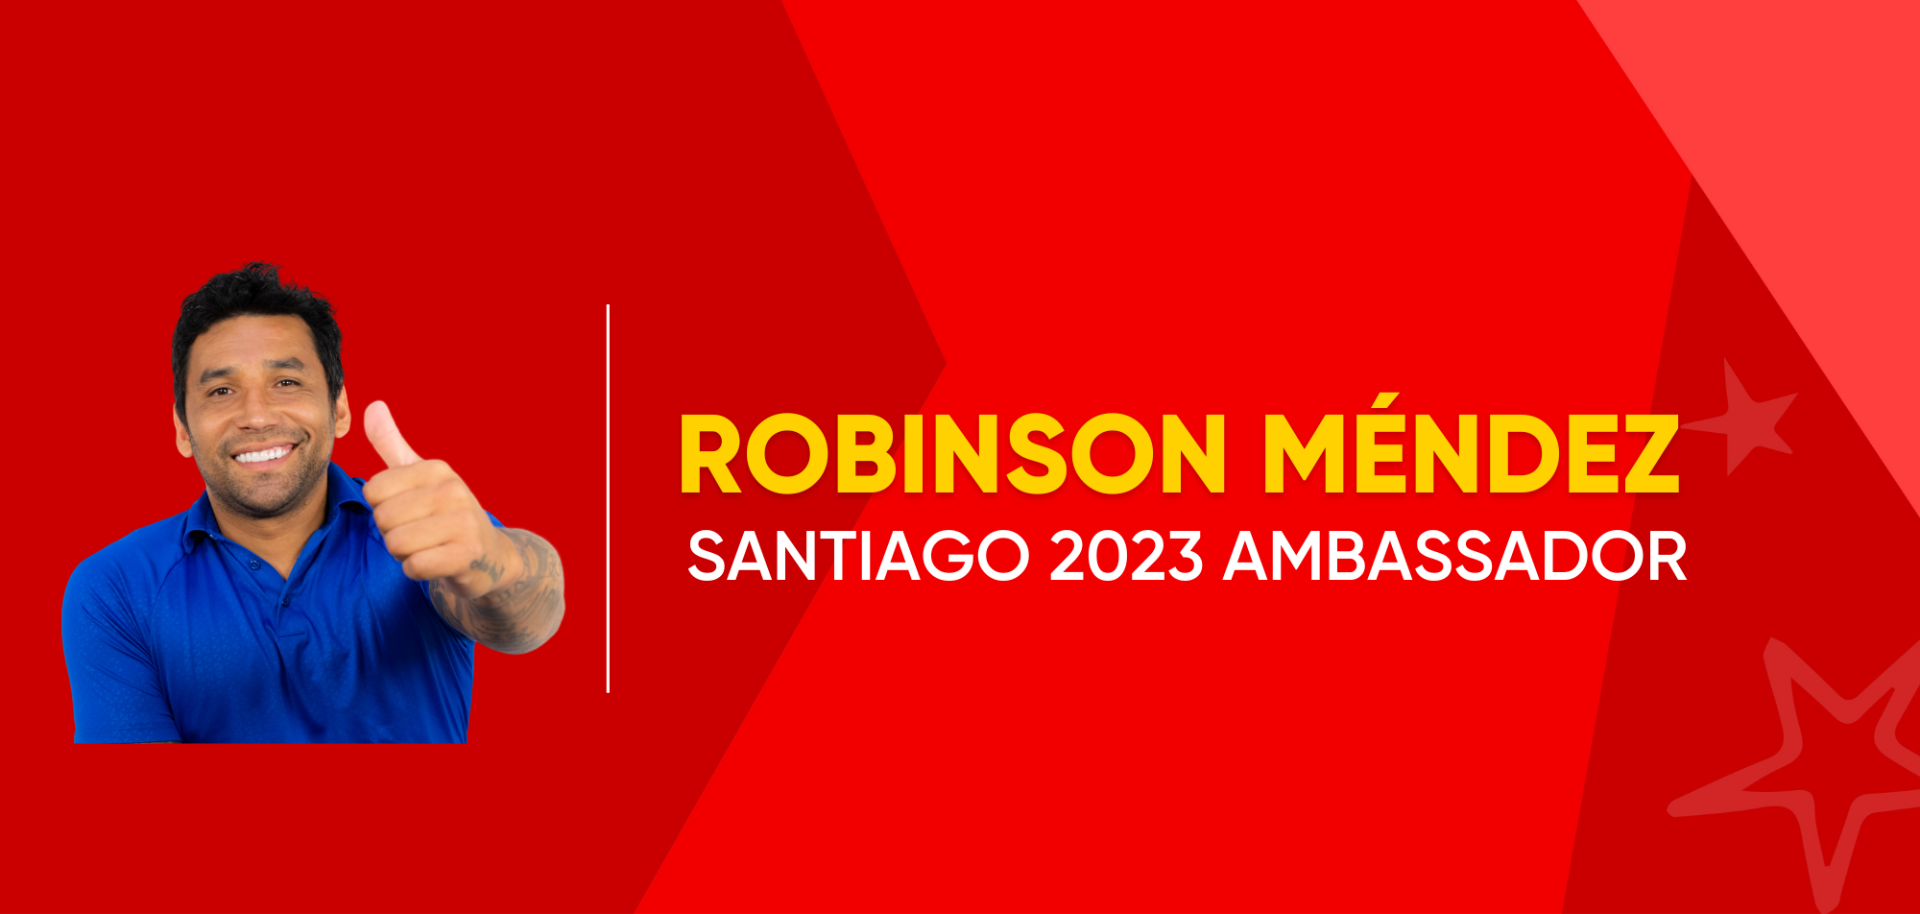 Robinson Méndez joins the ambassadors team. (Picture from: Santiago 2023).